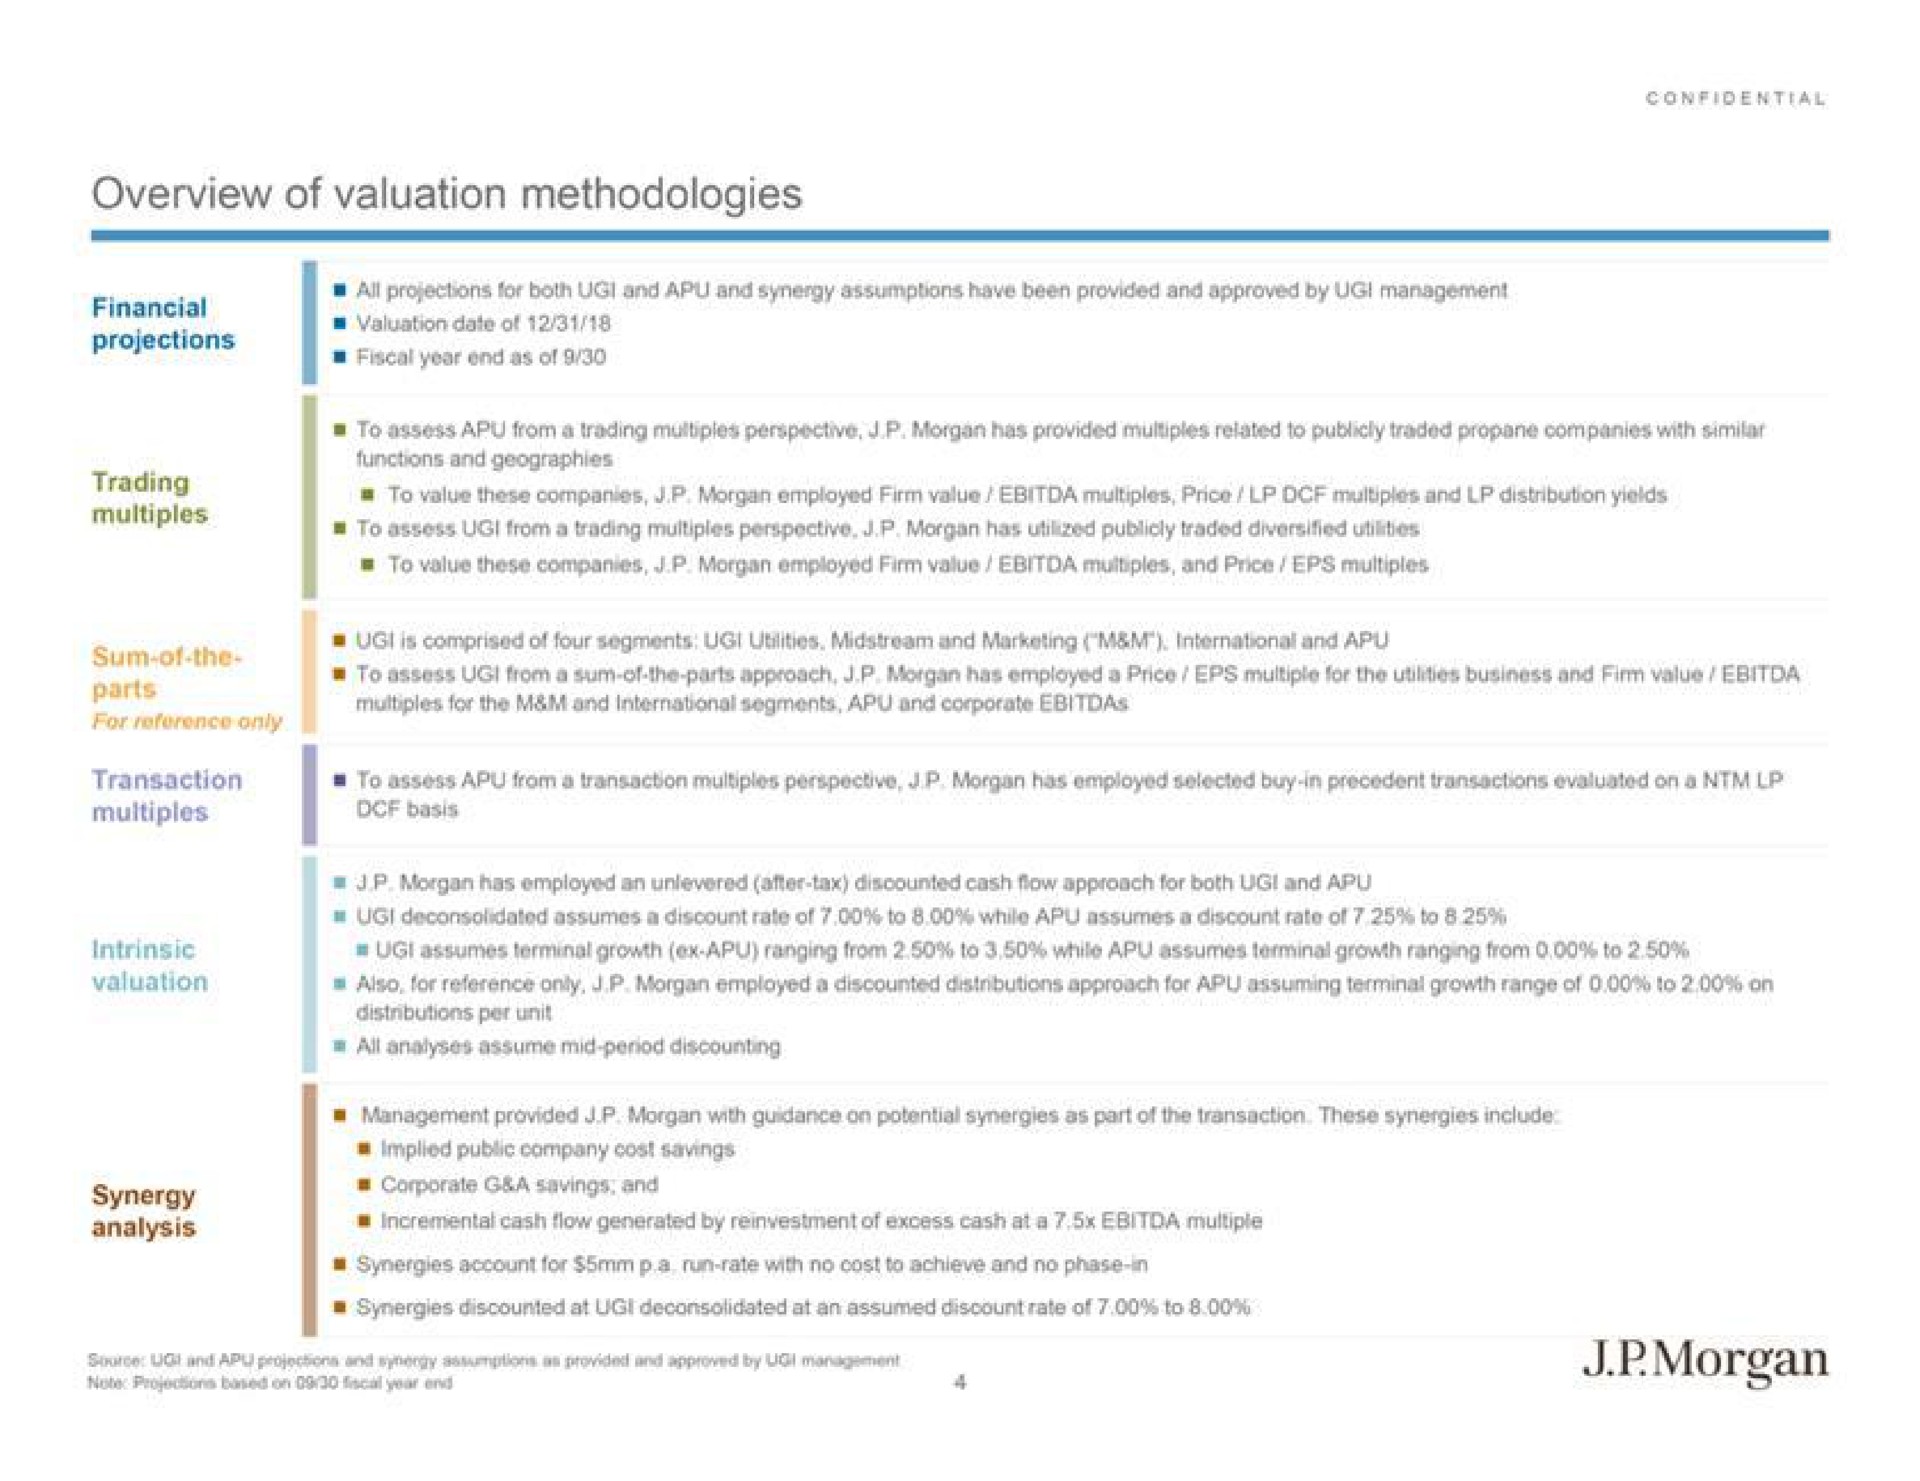 overview of valuation methodologies implied public company cost savings | J.P.Morgan